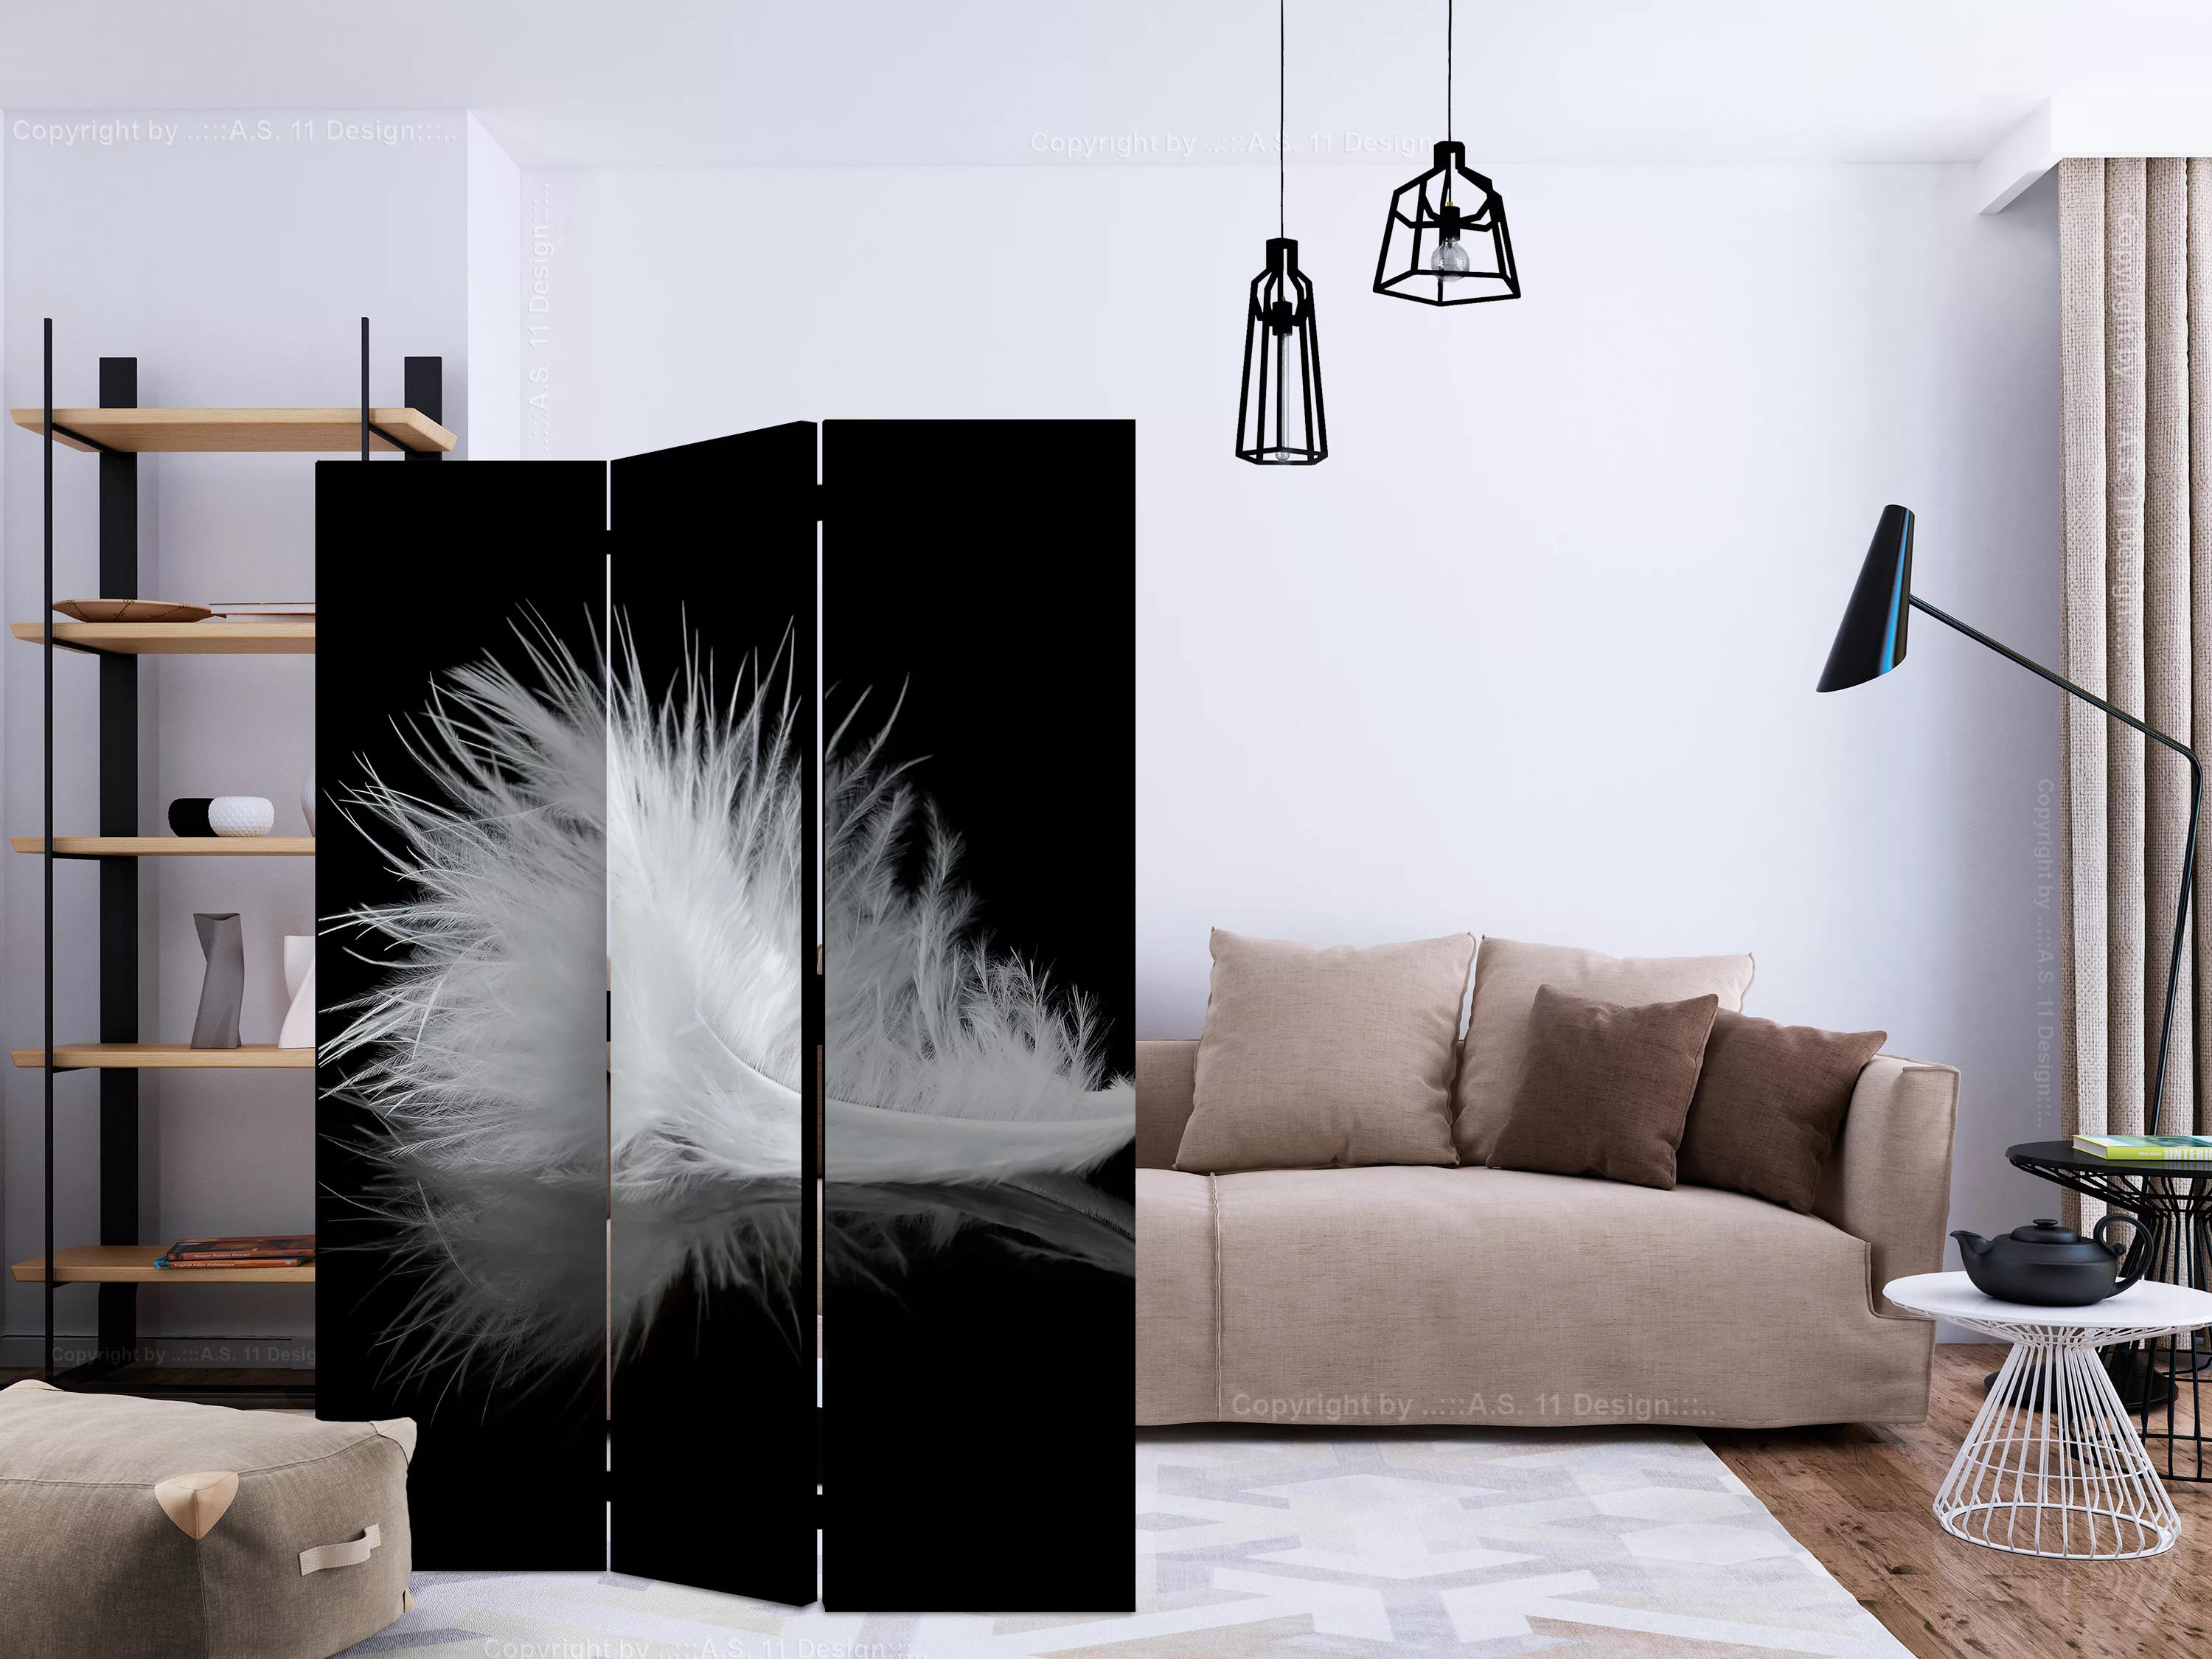 3-teiliges Paravent - The Transience Of The Moment [room Dividers] günstig online kaufen